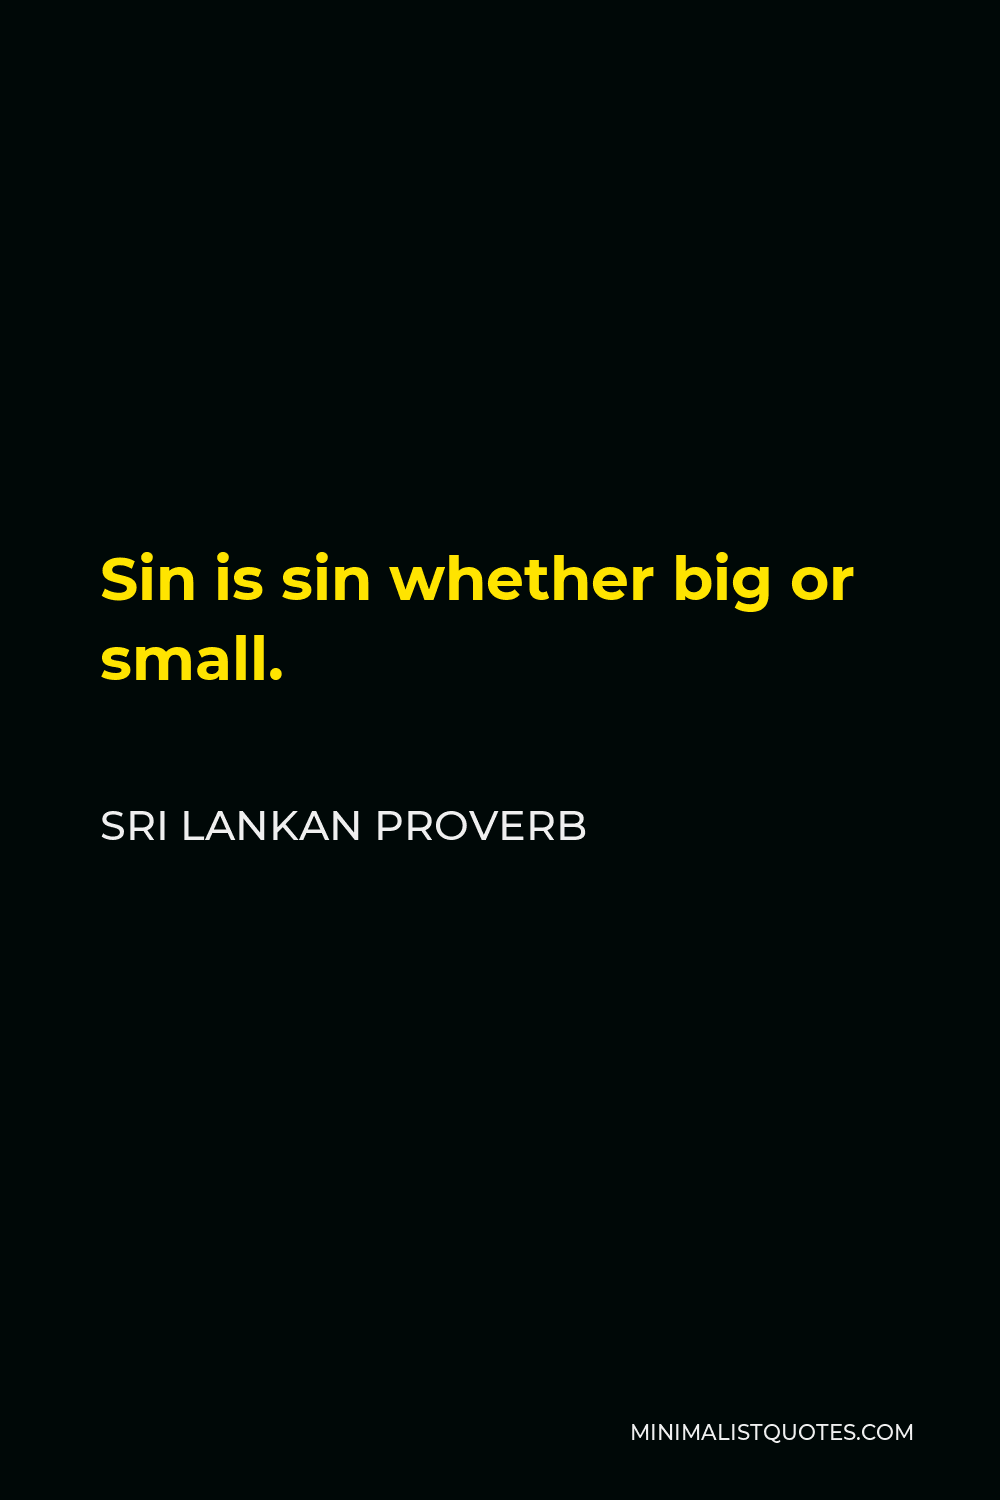 Sri Lankan Proverb Quote - Sin is sin whether big or small.